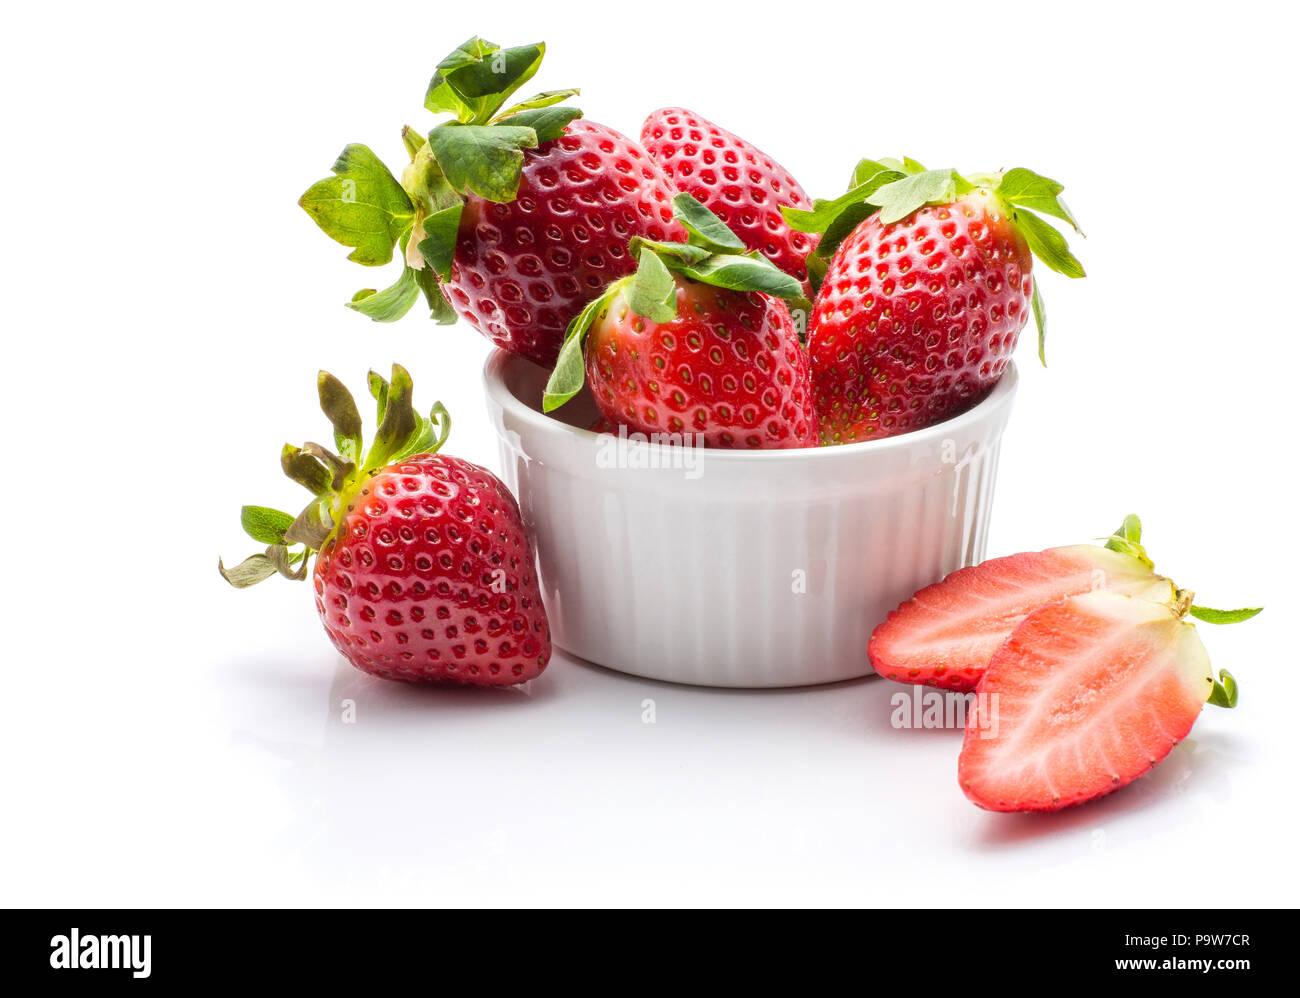 Garden strawberries in a ceramic isolated on white background ideal breakfast Stock Photo